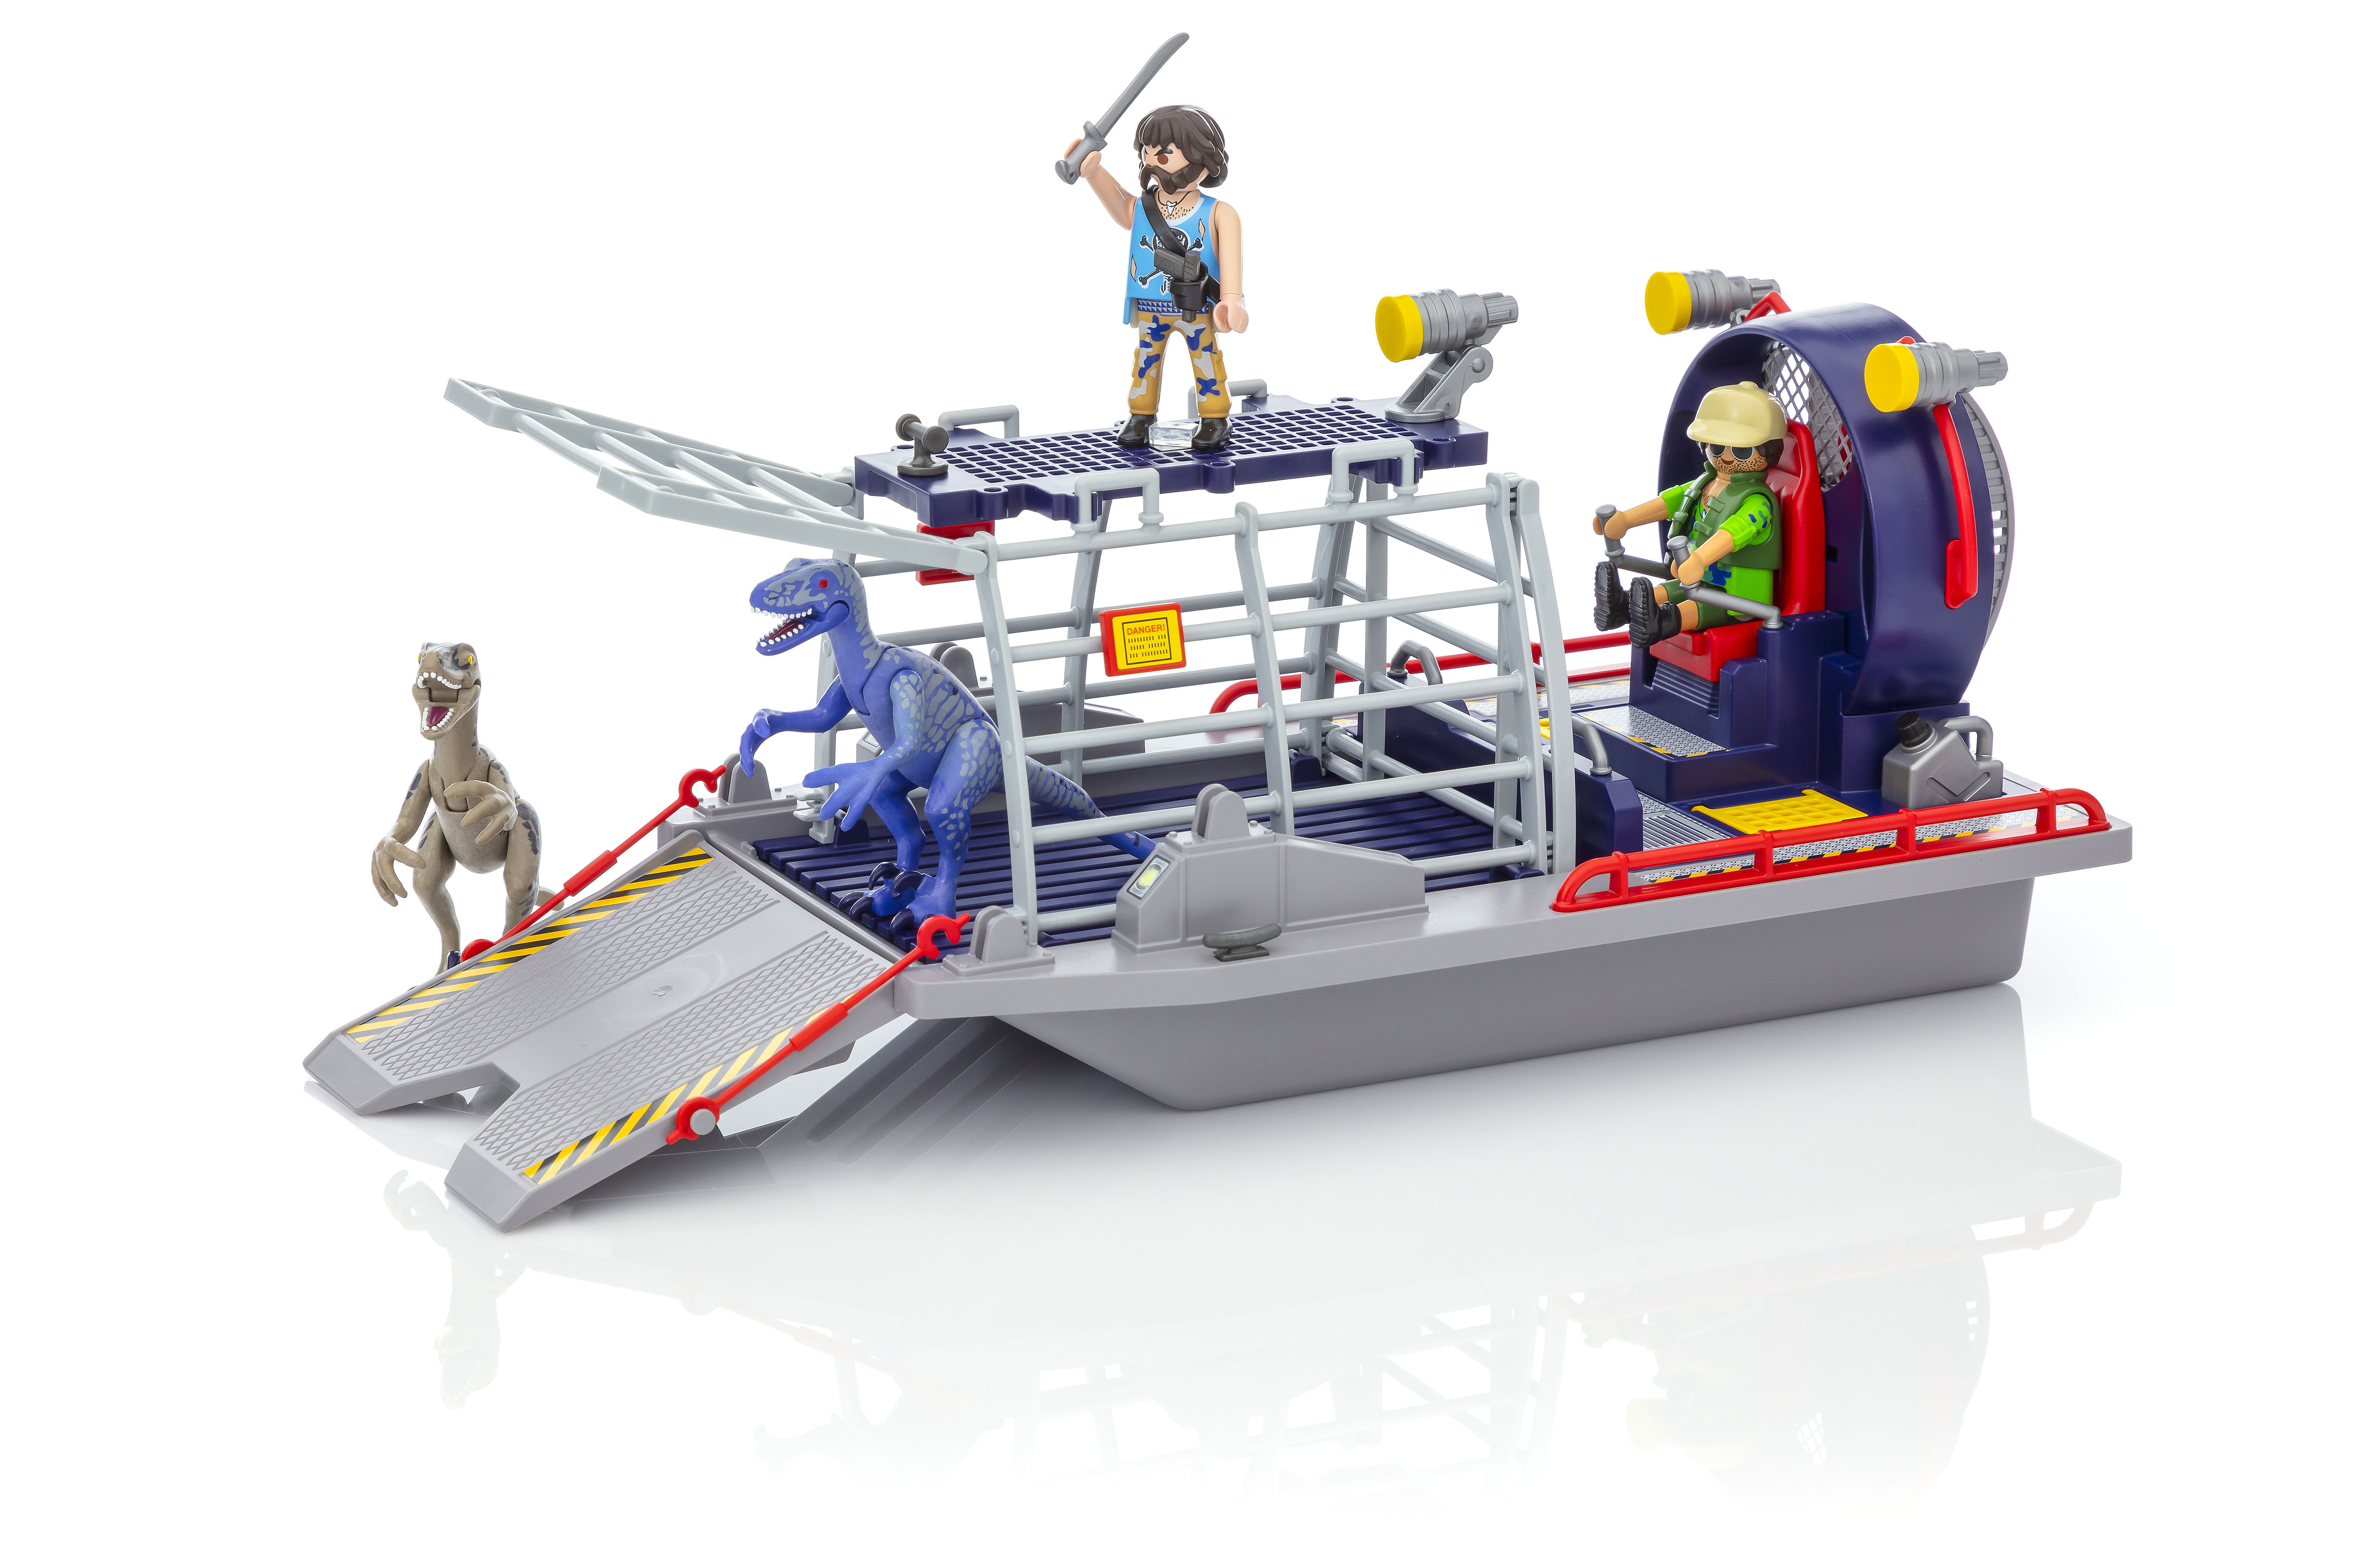  PLAYMOBIL Enemy Airboat with Raptor Building Set